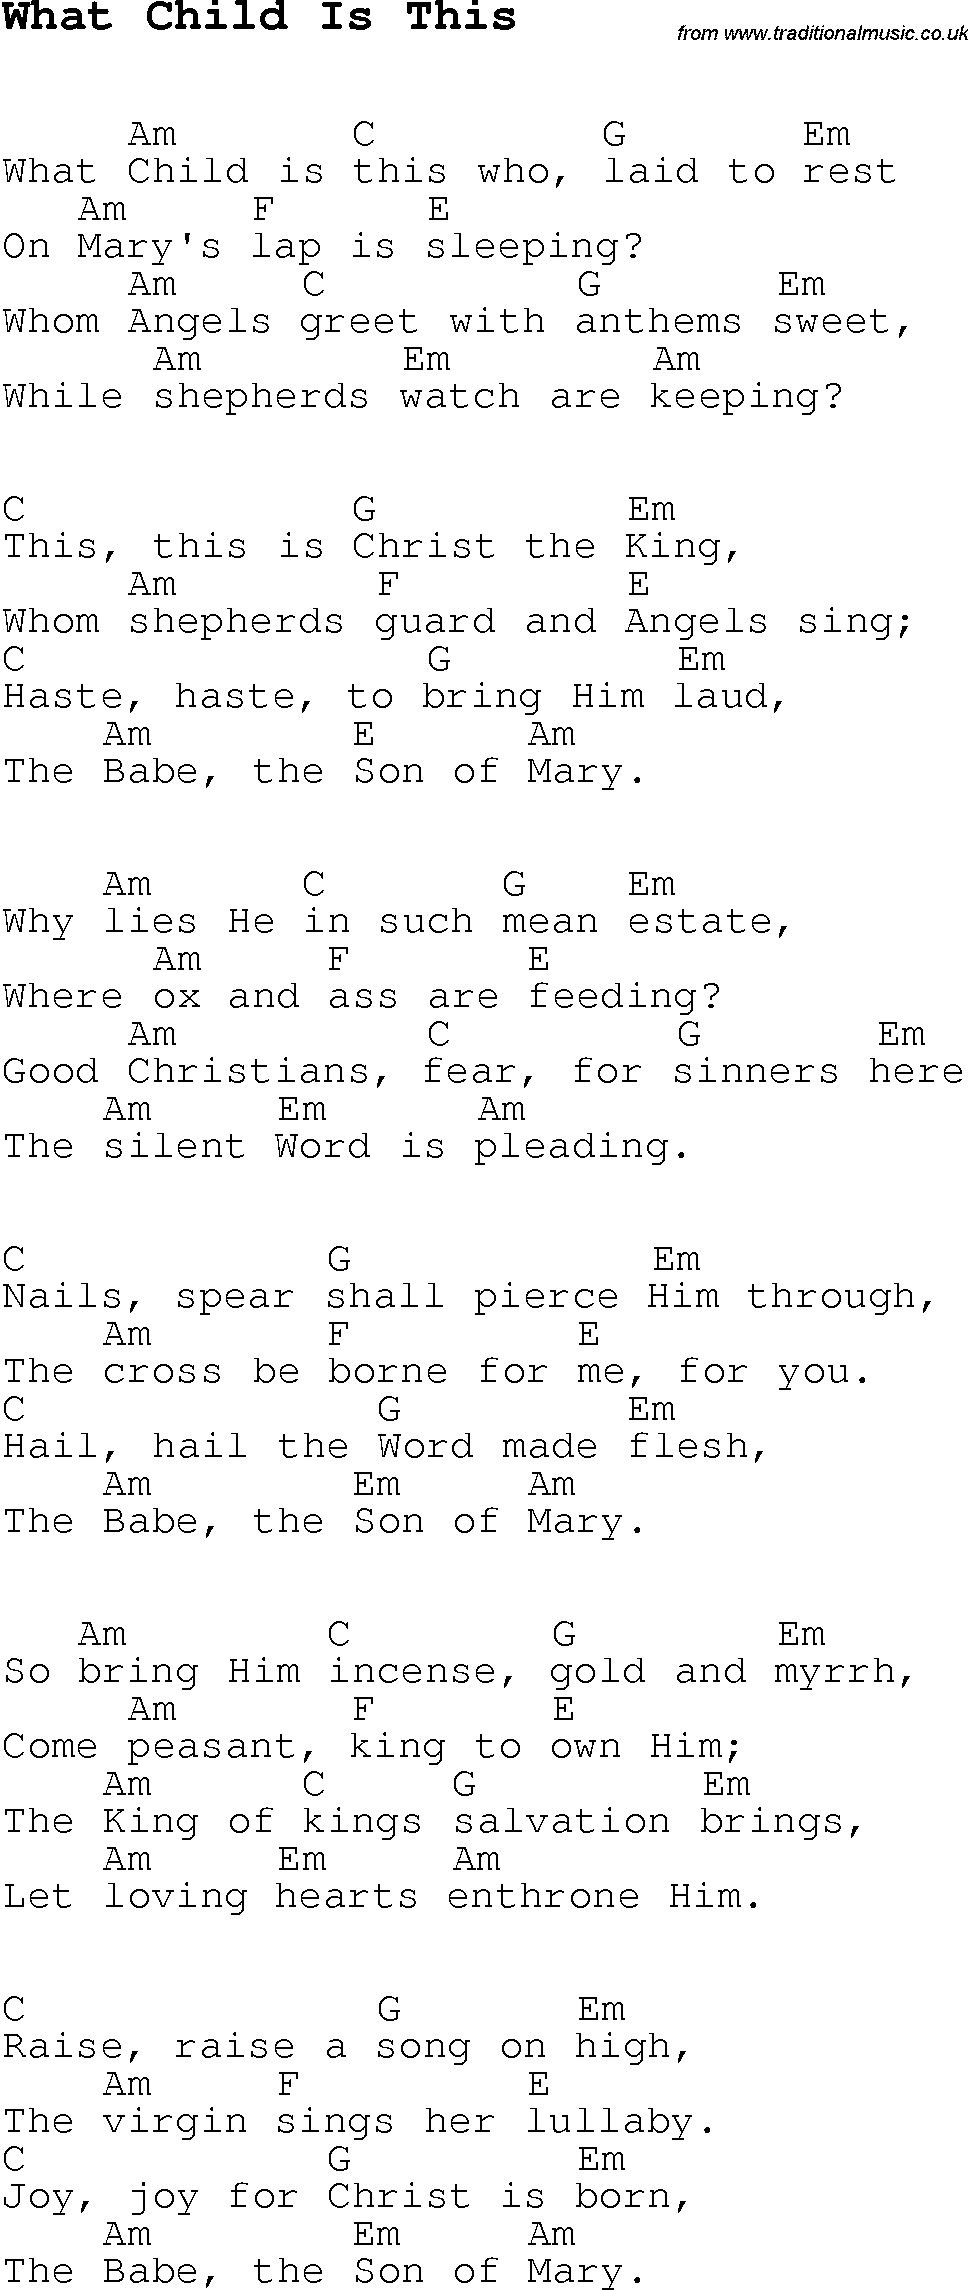 Christmas Carol/Song lyrics with chords for What Child Is This